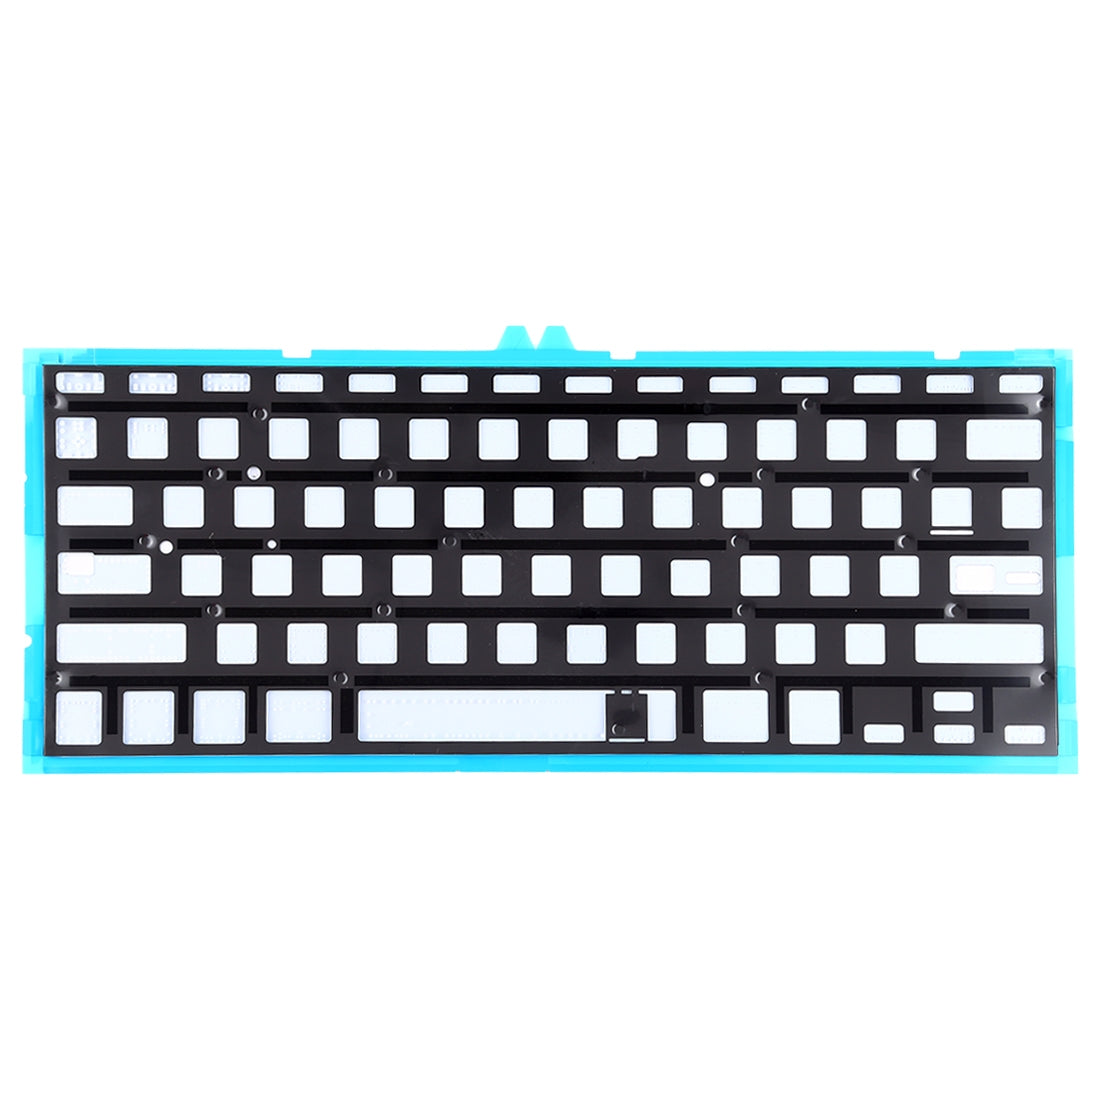 Backlight Keyboard US Version without ñ MacBook 13.3 A1369 2011 2015